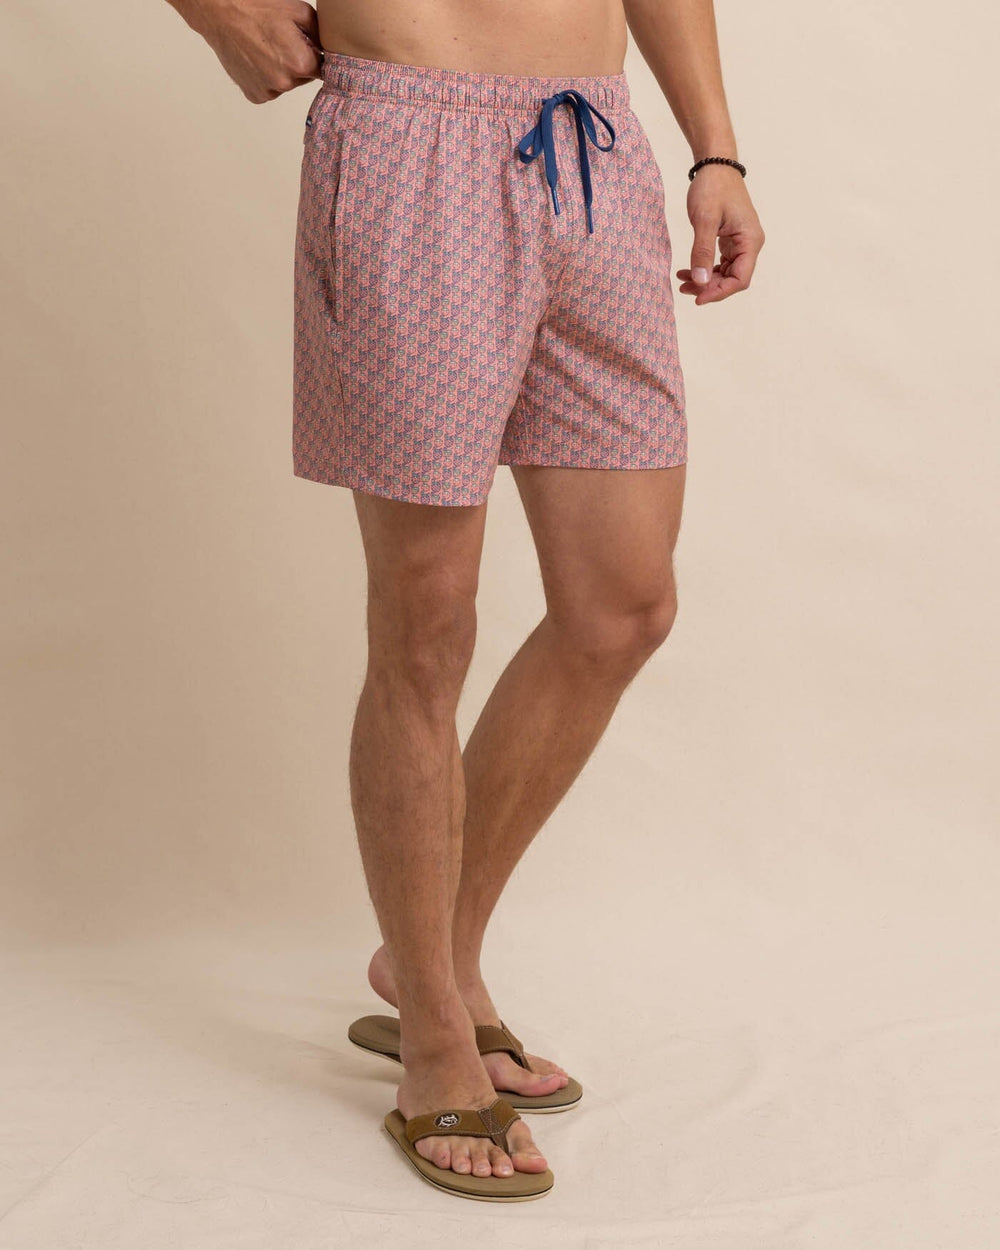 The front view of the Southern Tide Vacation Views Swim Trunk by Southern Tide - Desert Flower Coral